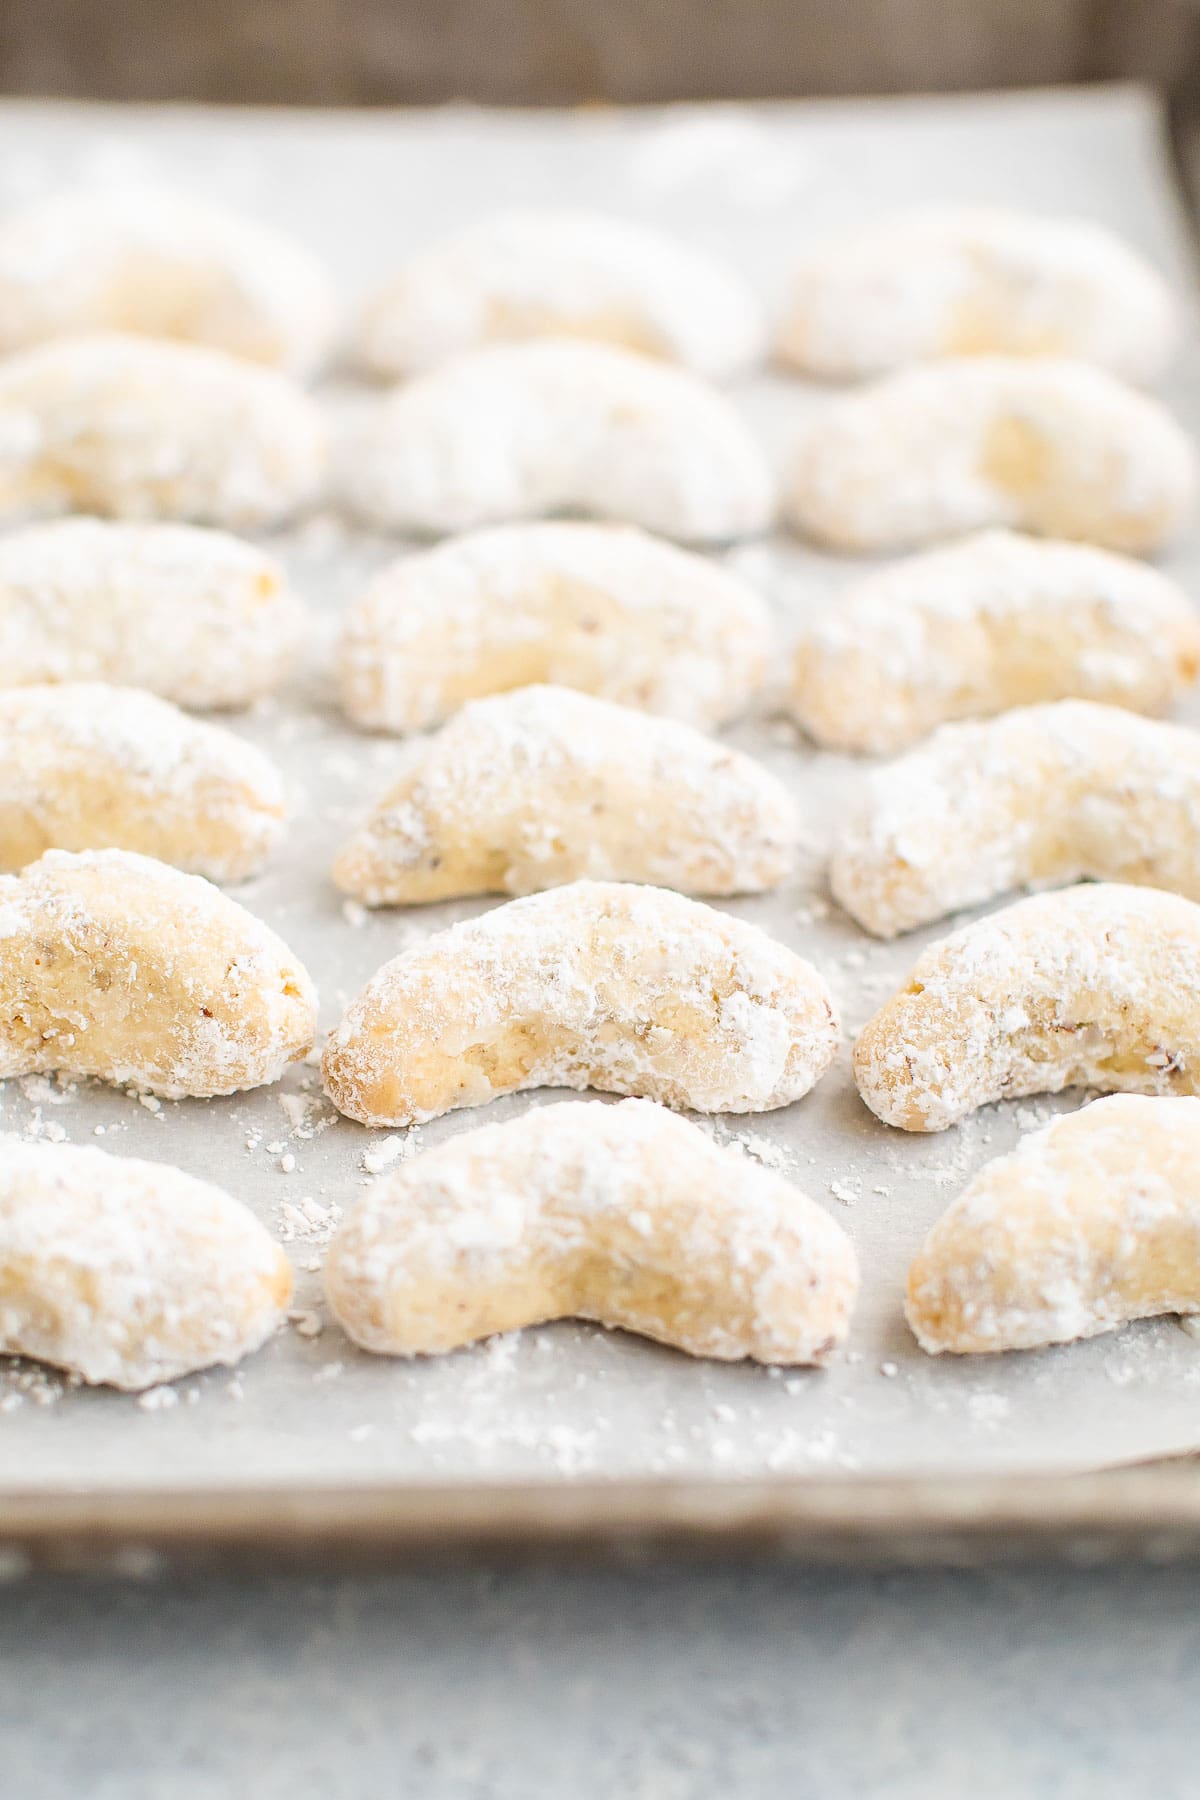 Baked and coated almond crescent cookies on a baking sheet lined with parchment paper.